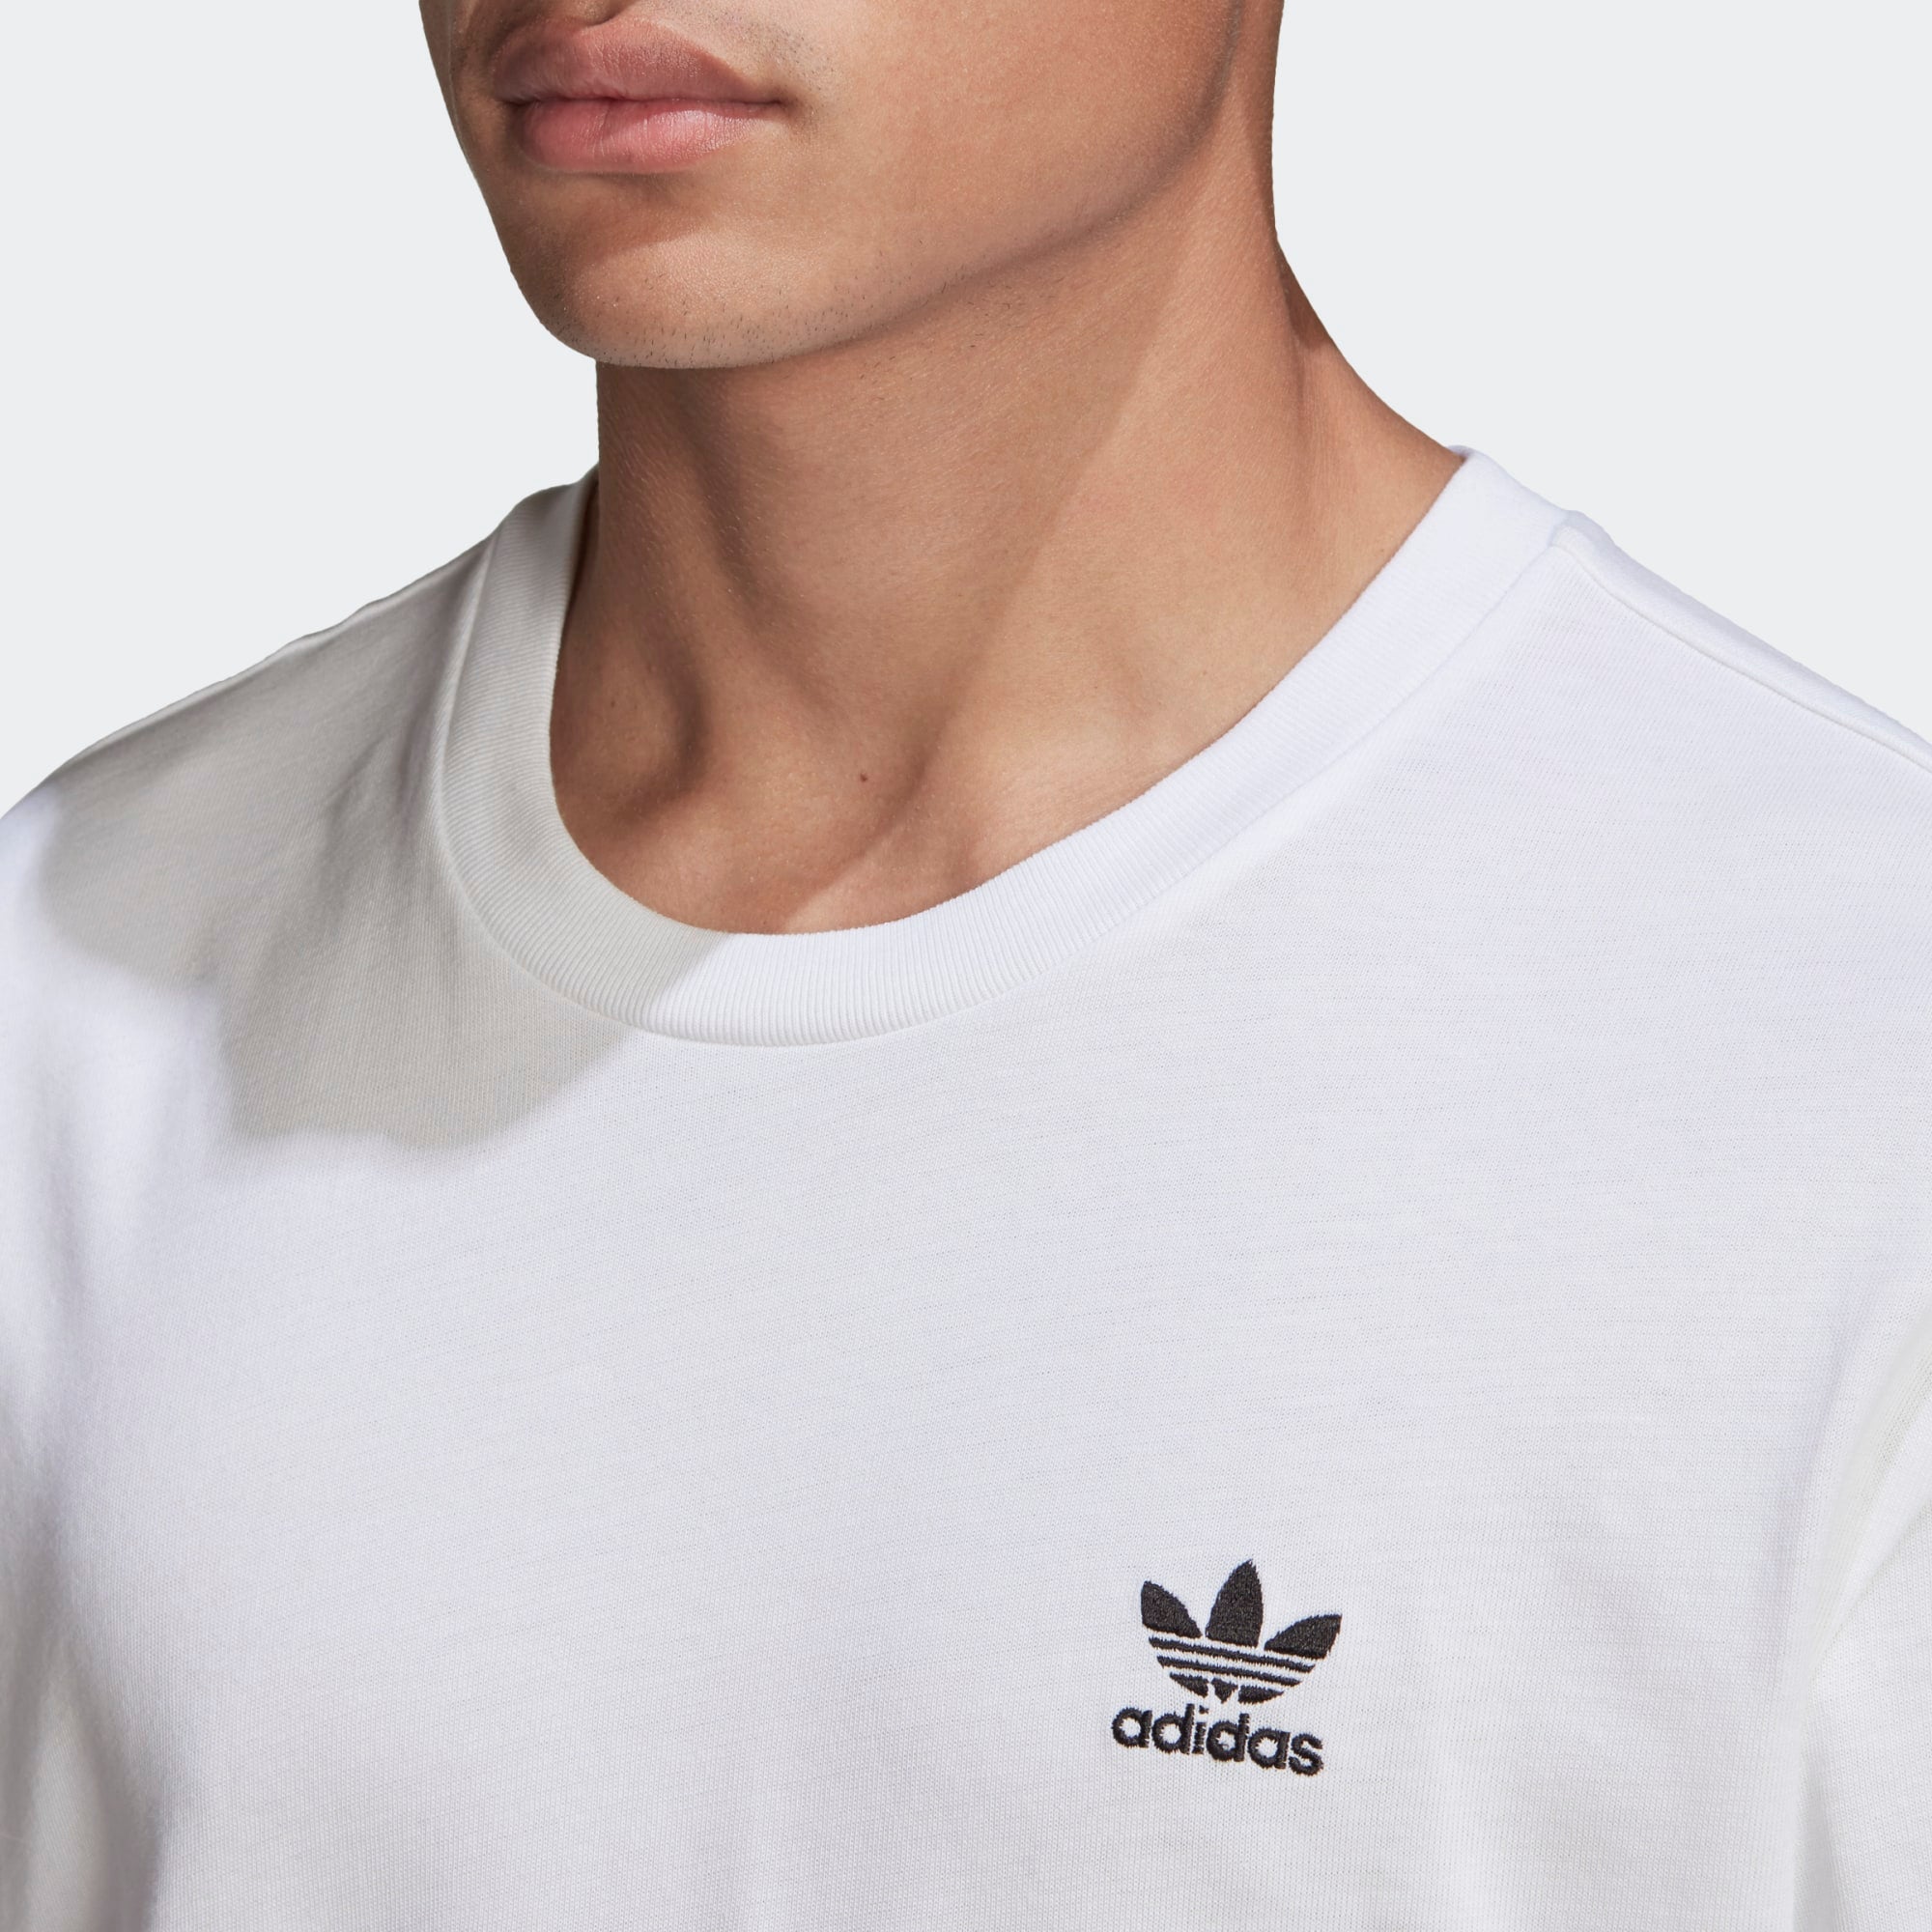 Adidas Adicolor Classics Embroidered (White)(GN3453) Trilogy PH Merch Boxy – Tee Logo